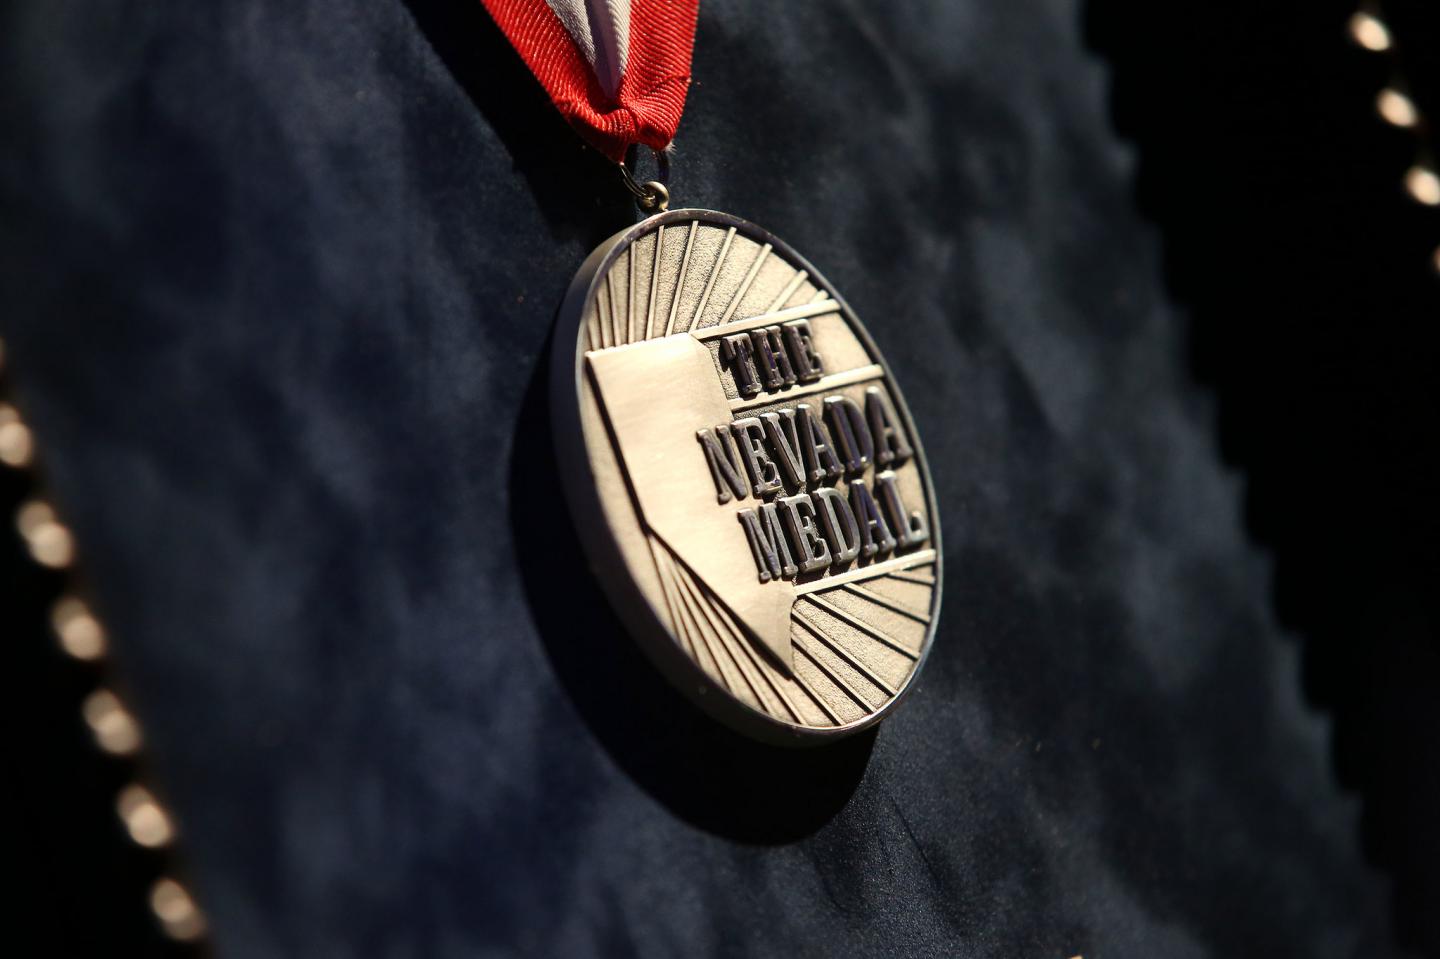 The DRI Nevada Medal of Science